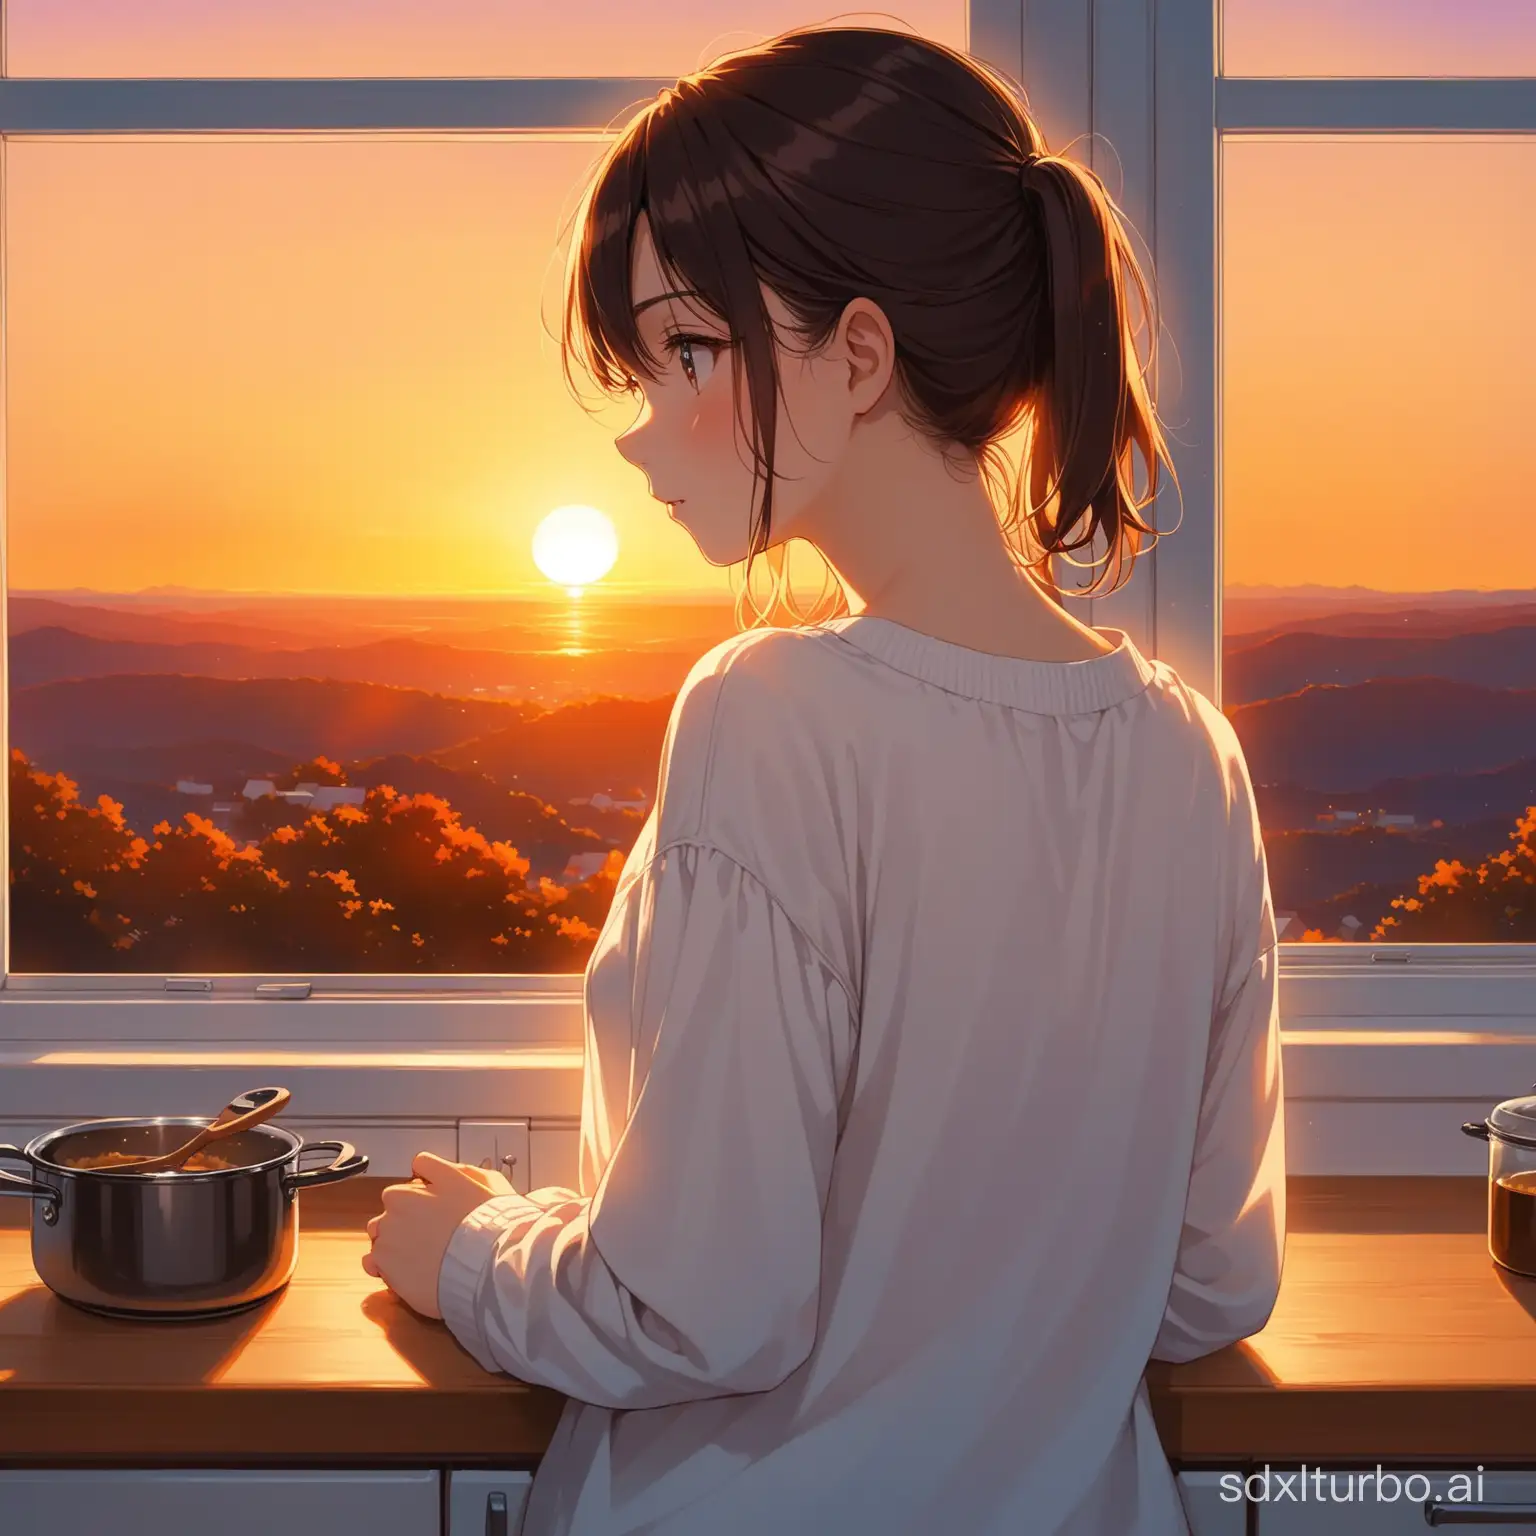 teen waiting in the kitchen with nothing but a white seethrought blouse looking outside the window in a beautiful sunset, a warm cozy feeling